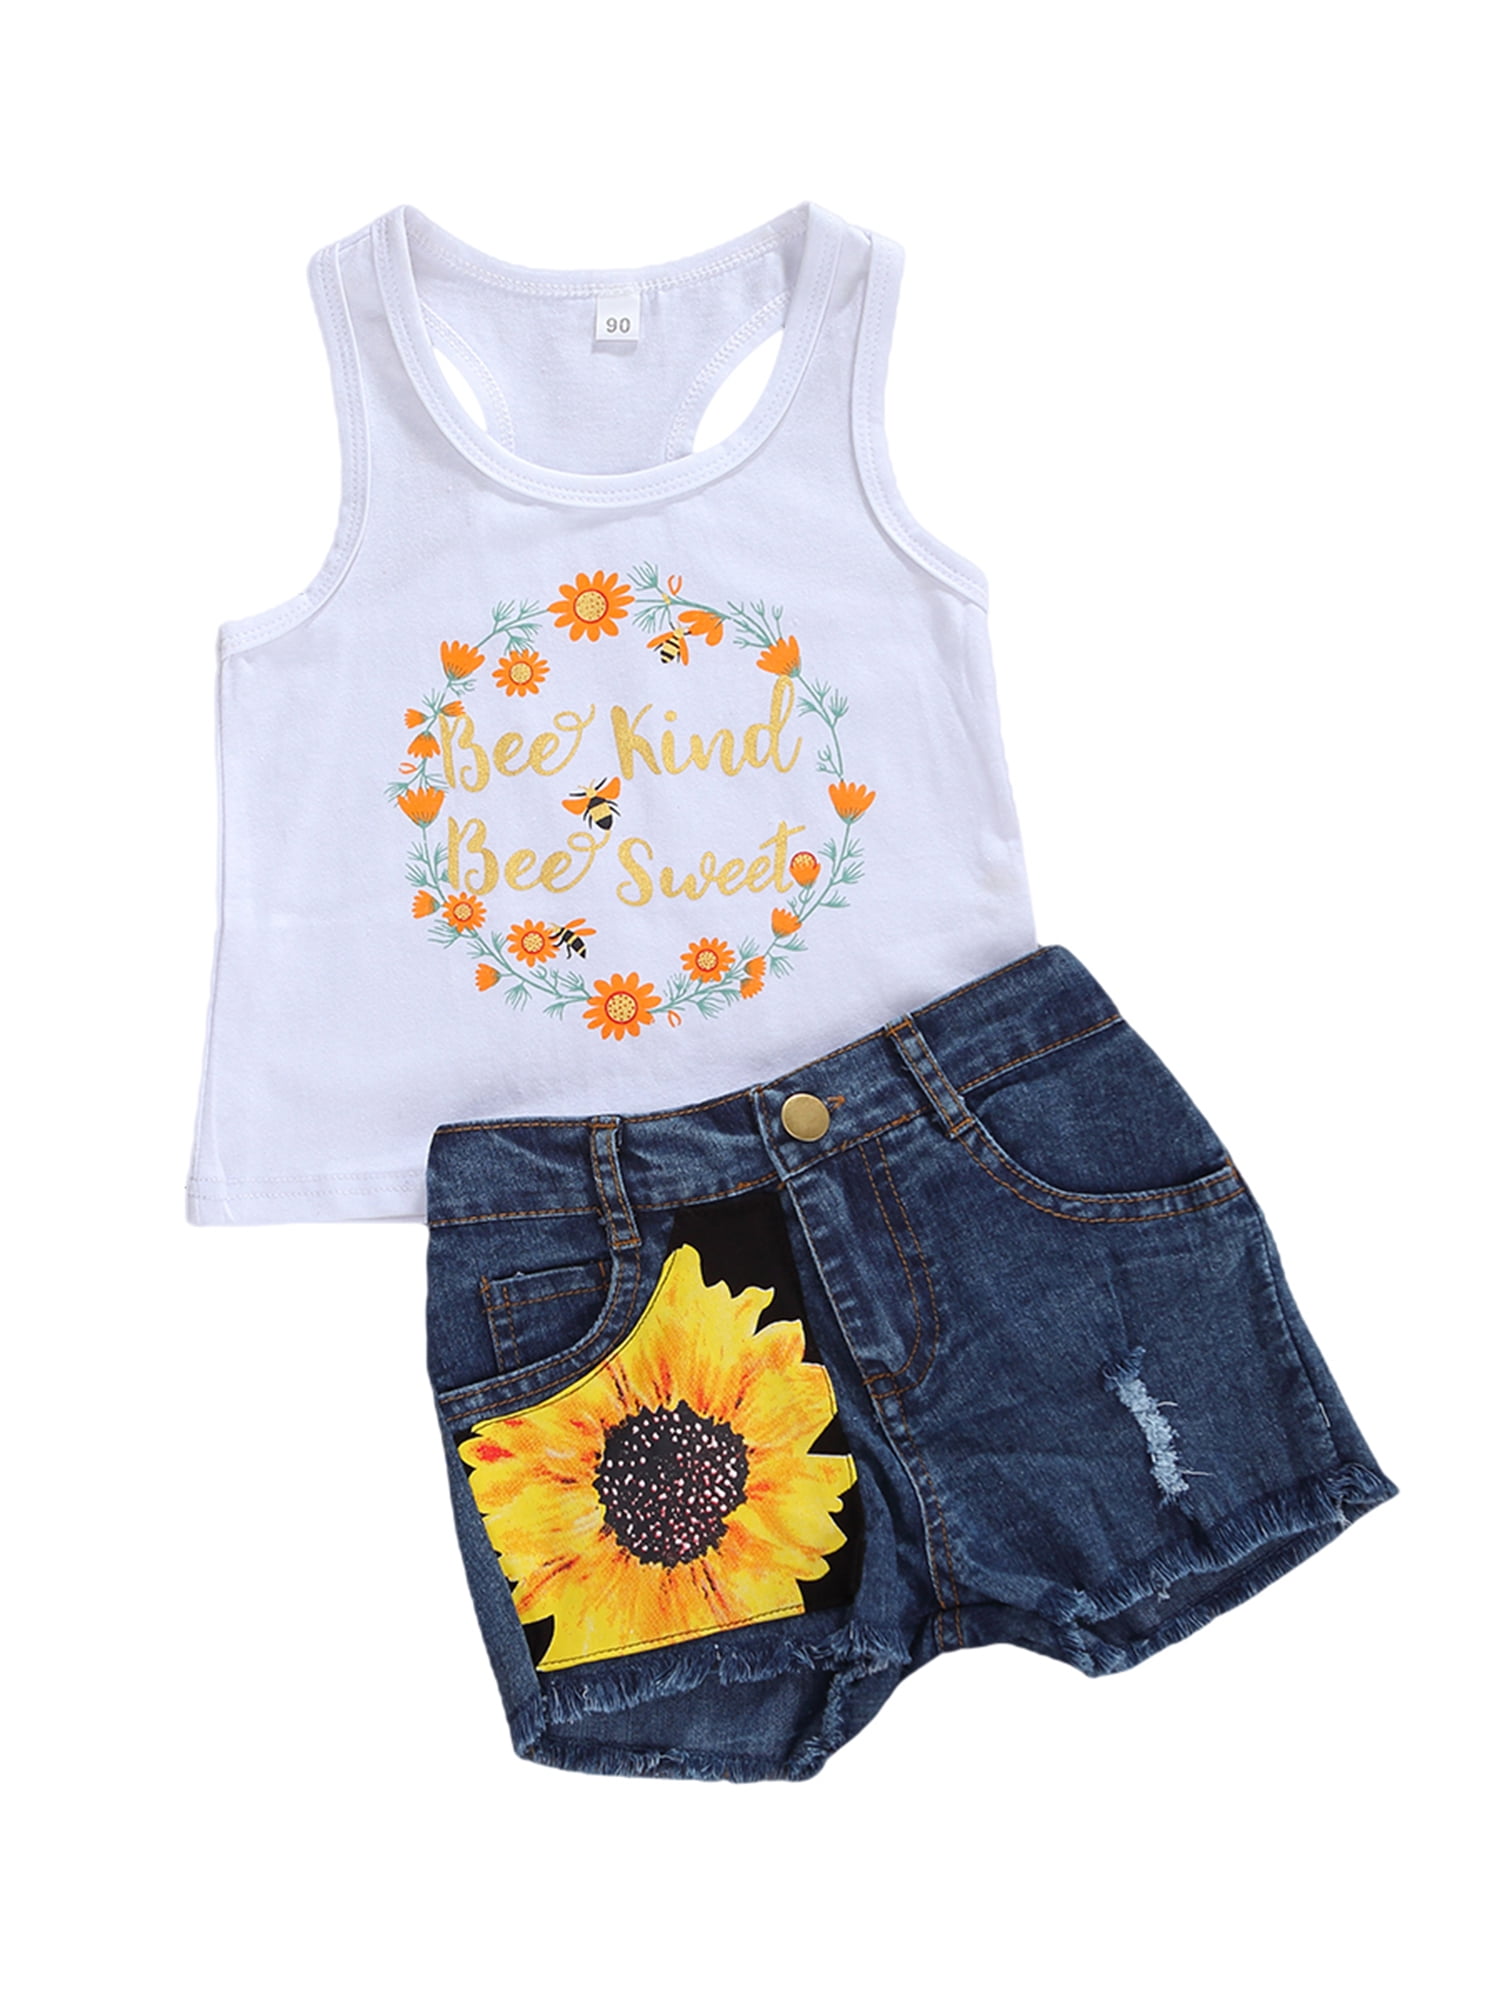 Canrulo Toddler Baby Girl Summer Clothes Floral Sleeveless T-Shirt Tank  Tops +Denim Shorts 2Pcs Sunflower Outfits White 5-6 Years 